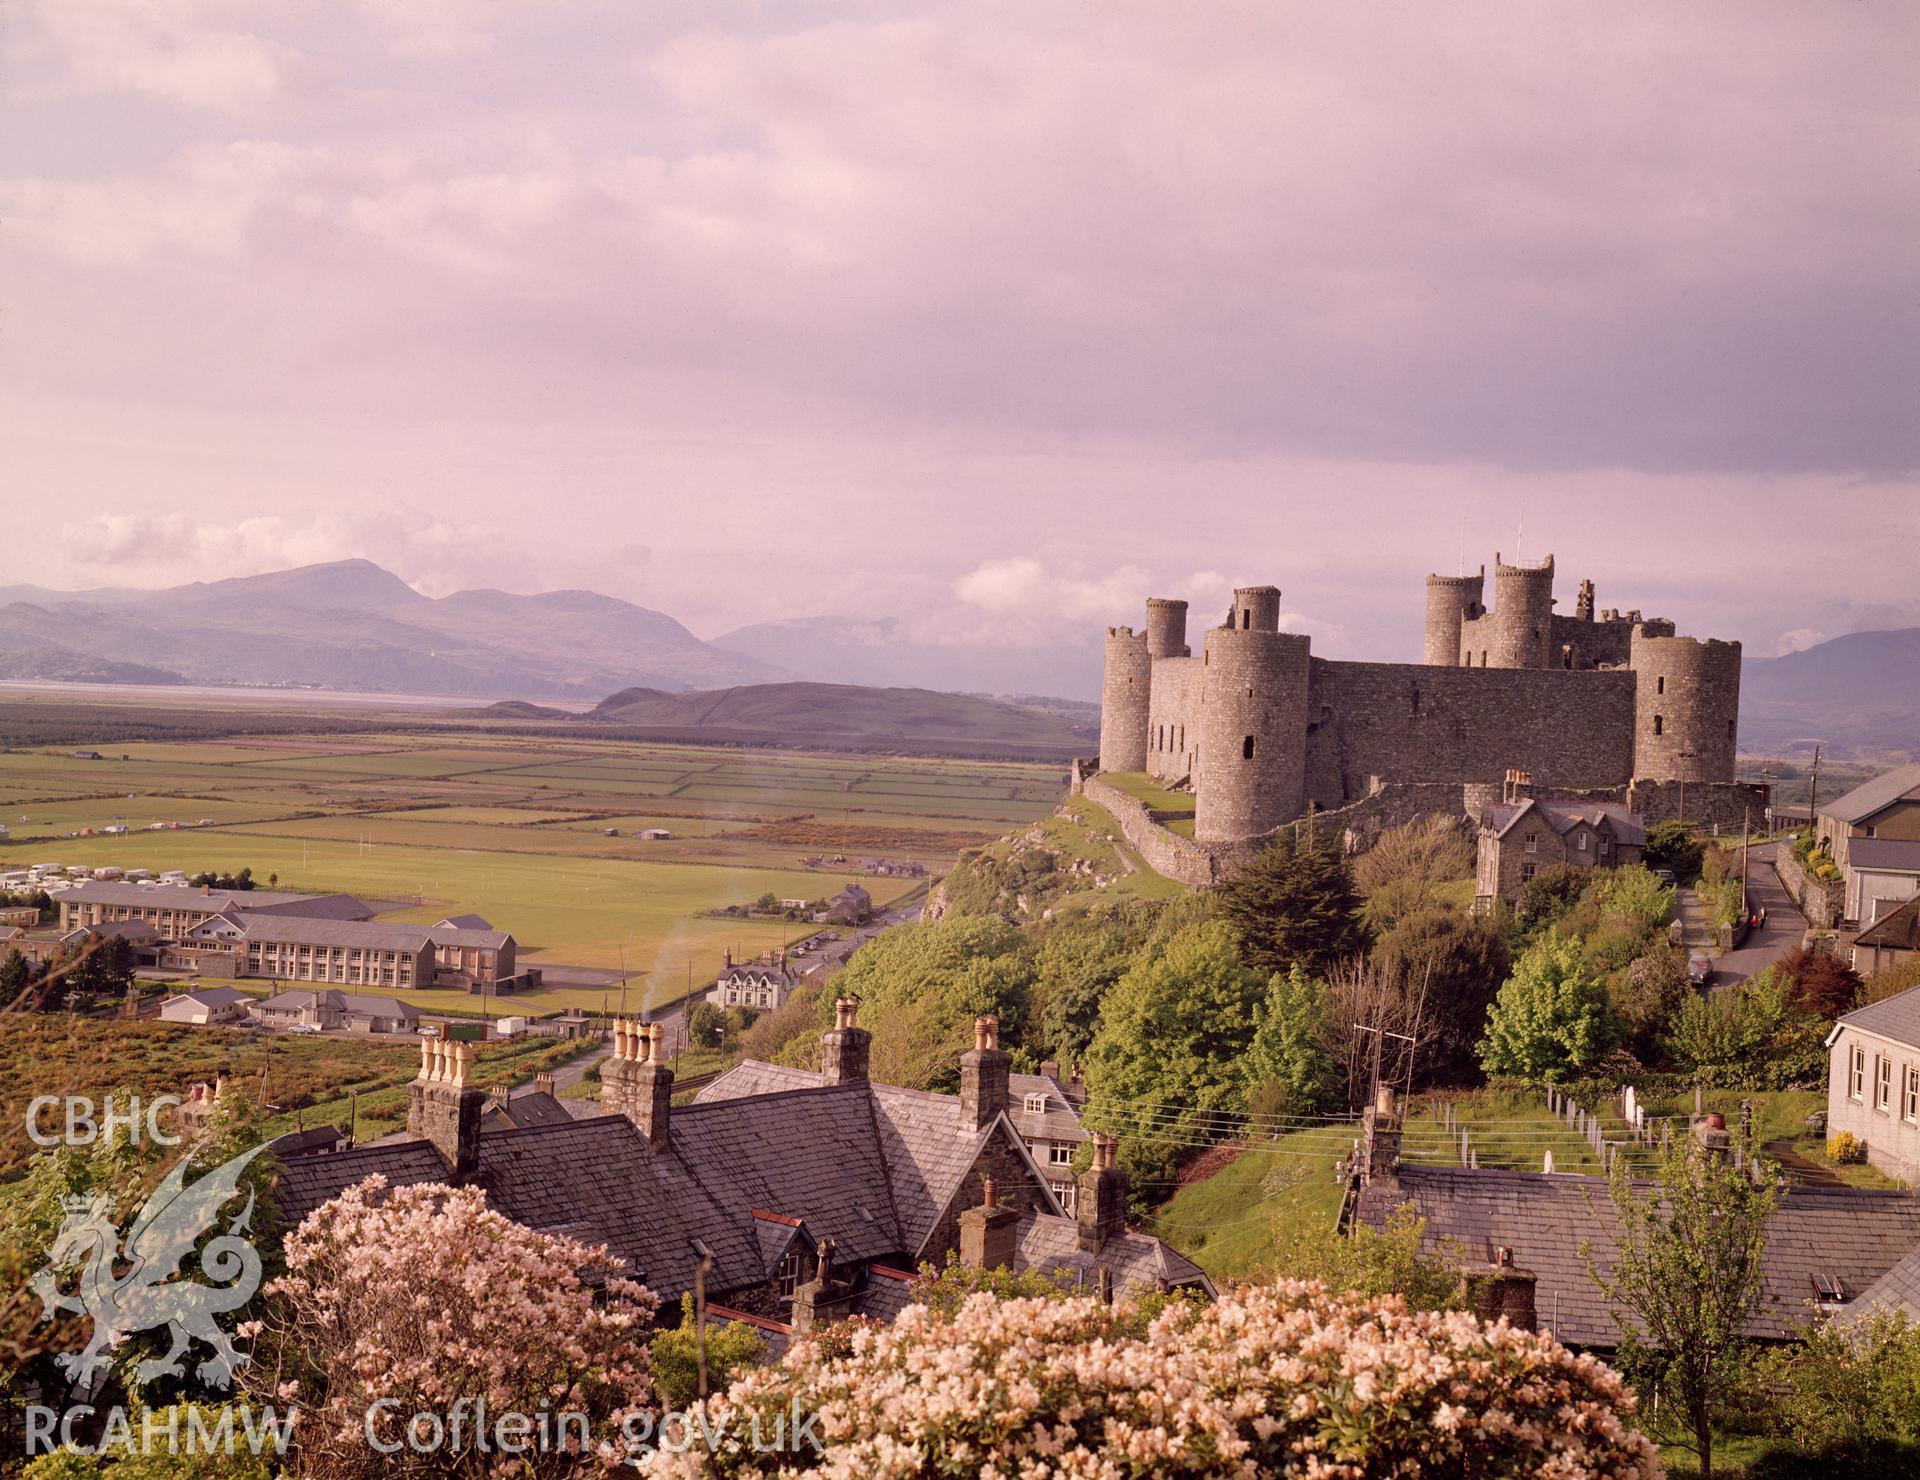 1 colour transparency showing view of Harlech Castle, undated; collated by the former Central Office of Information.